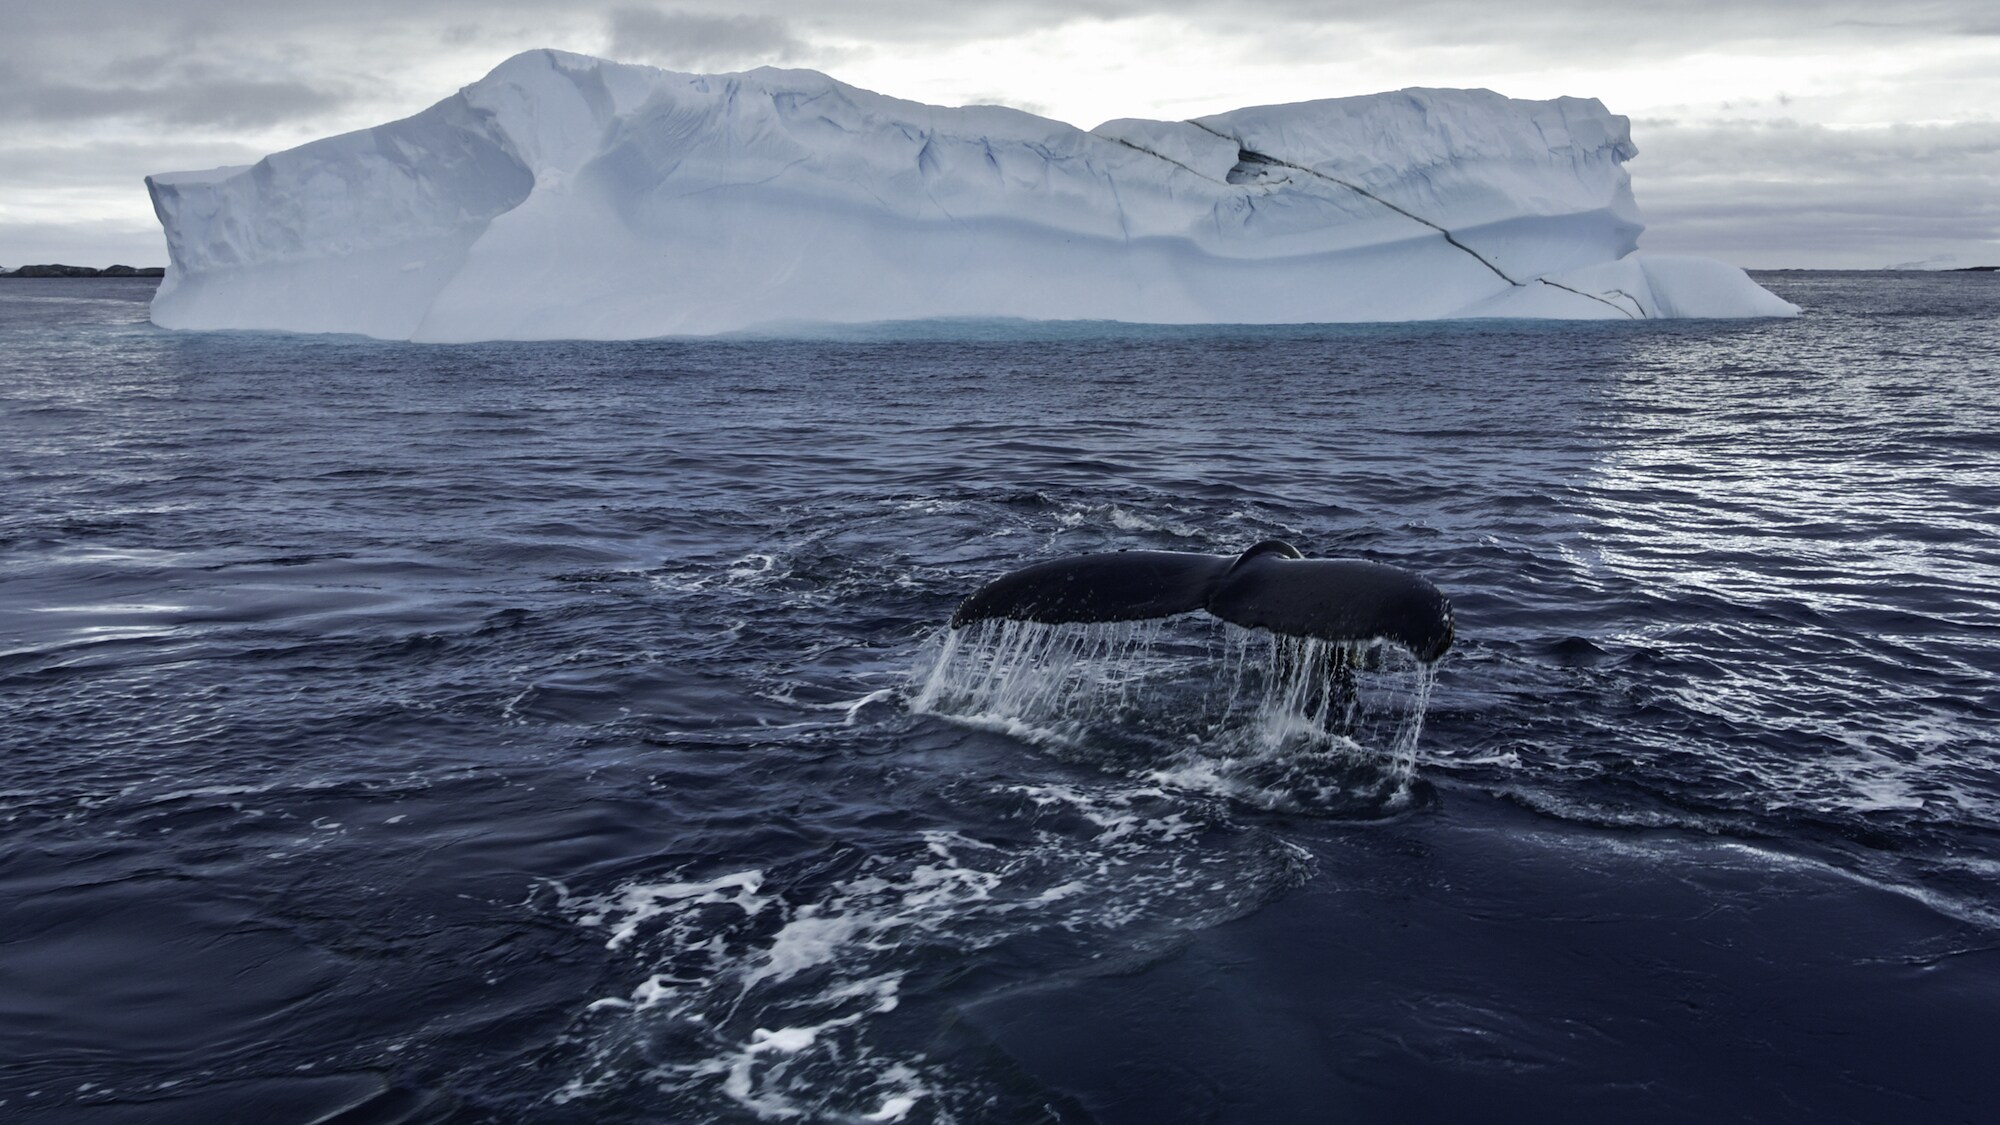 A humpback whale shows its fluke before a deep dive underneath one of Antarctica's icebergs. (National Geographic for Disney+/Hayes Baxley)